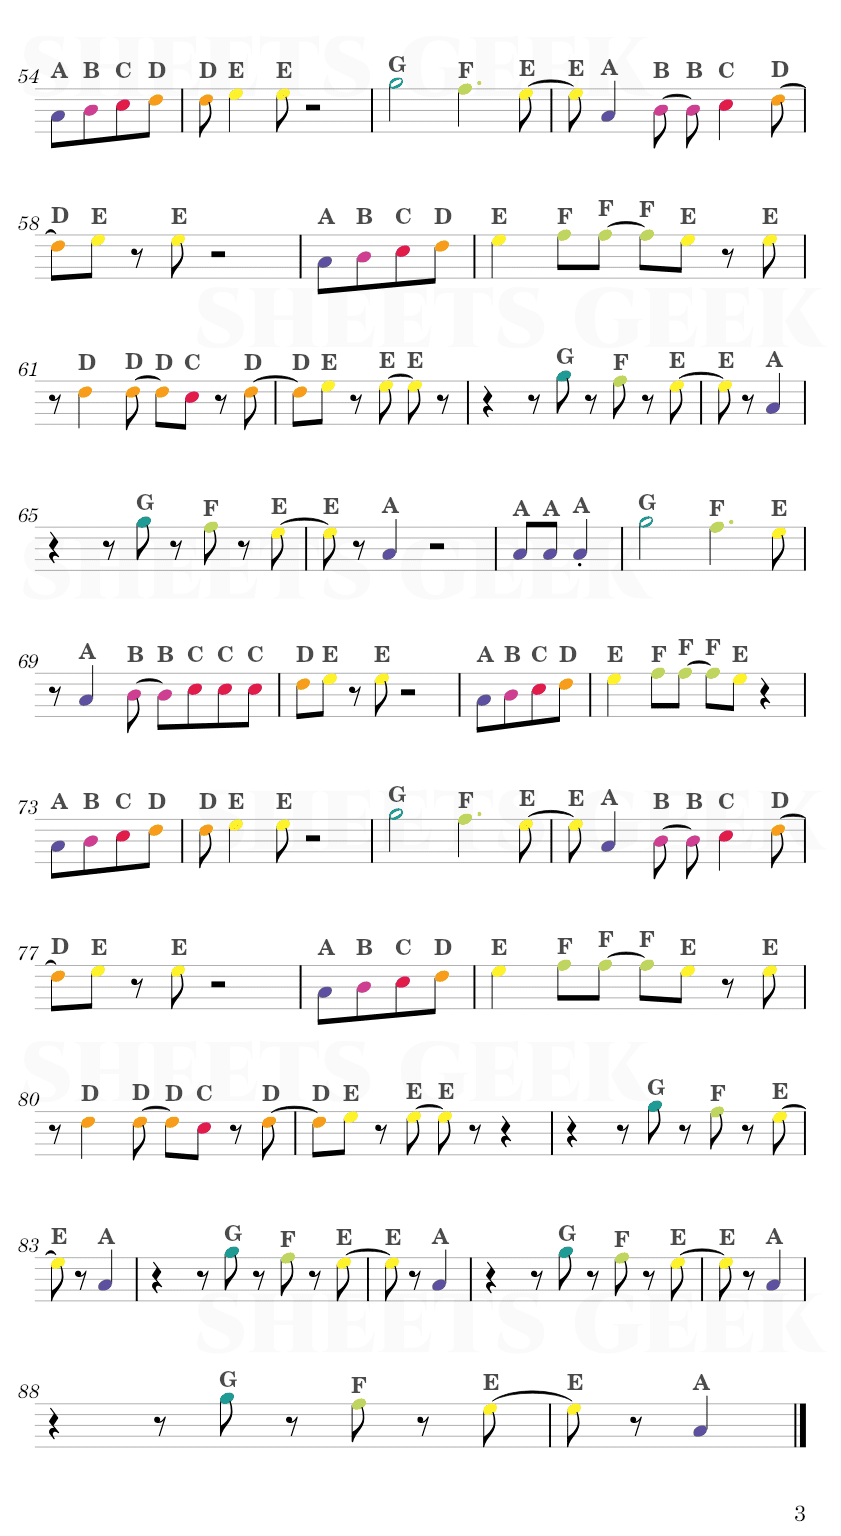 I'm Still Standing - Elton John Easy Sheet Music Free for piano, keyboard, flute, violin, sax, cello page 3